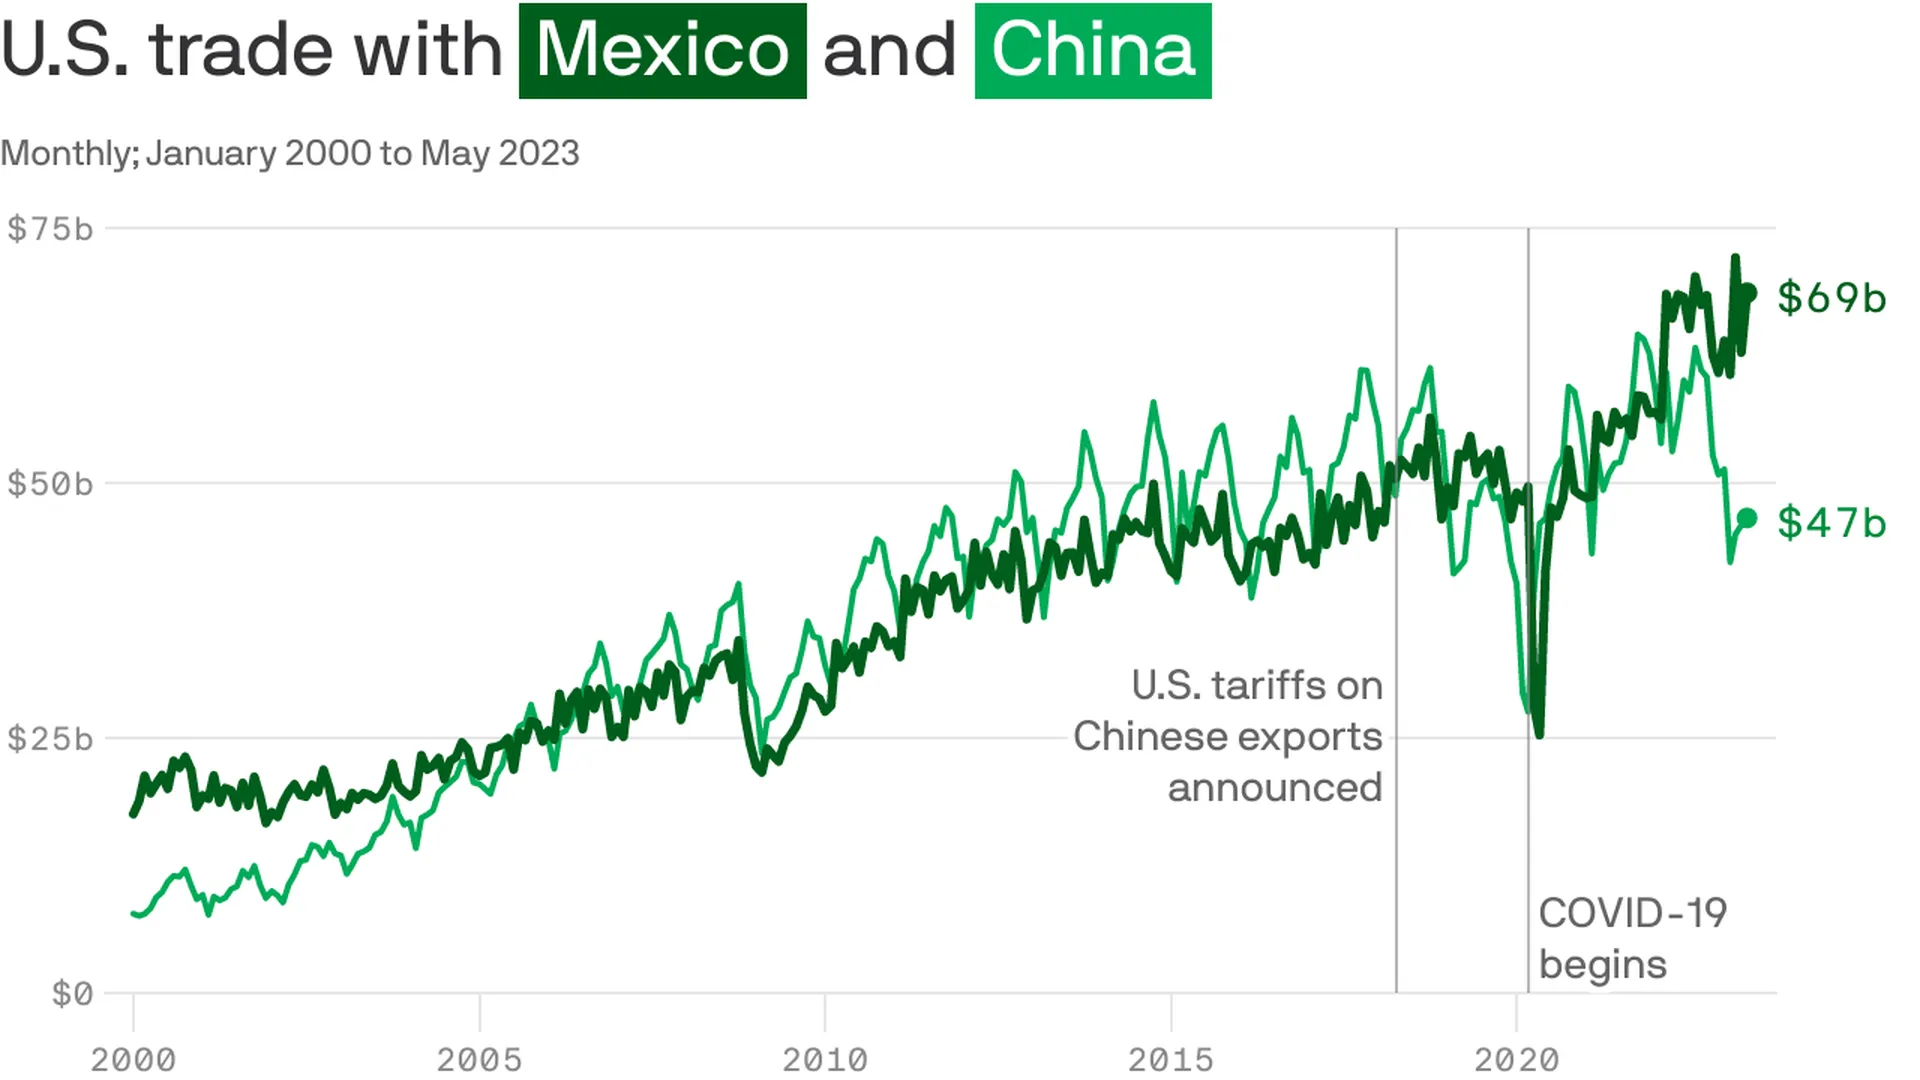 Mexico replaces China, which is in deep economic trouble as  top US trading partner